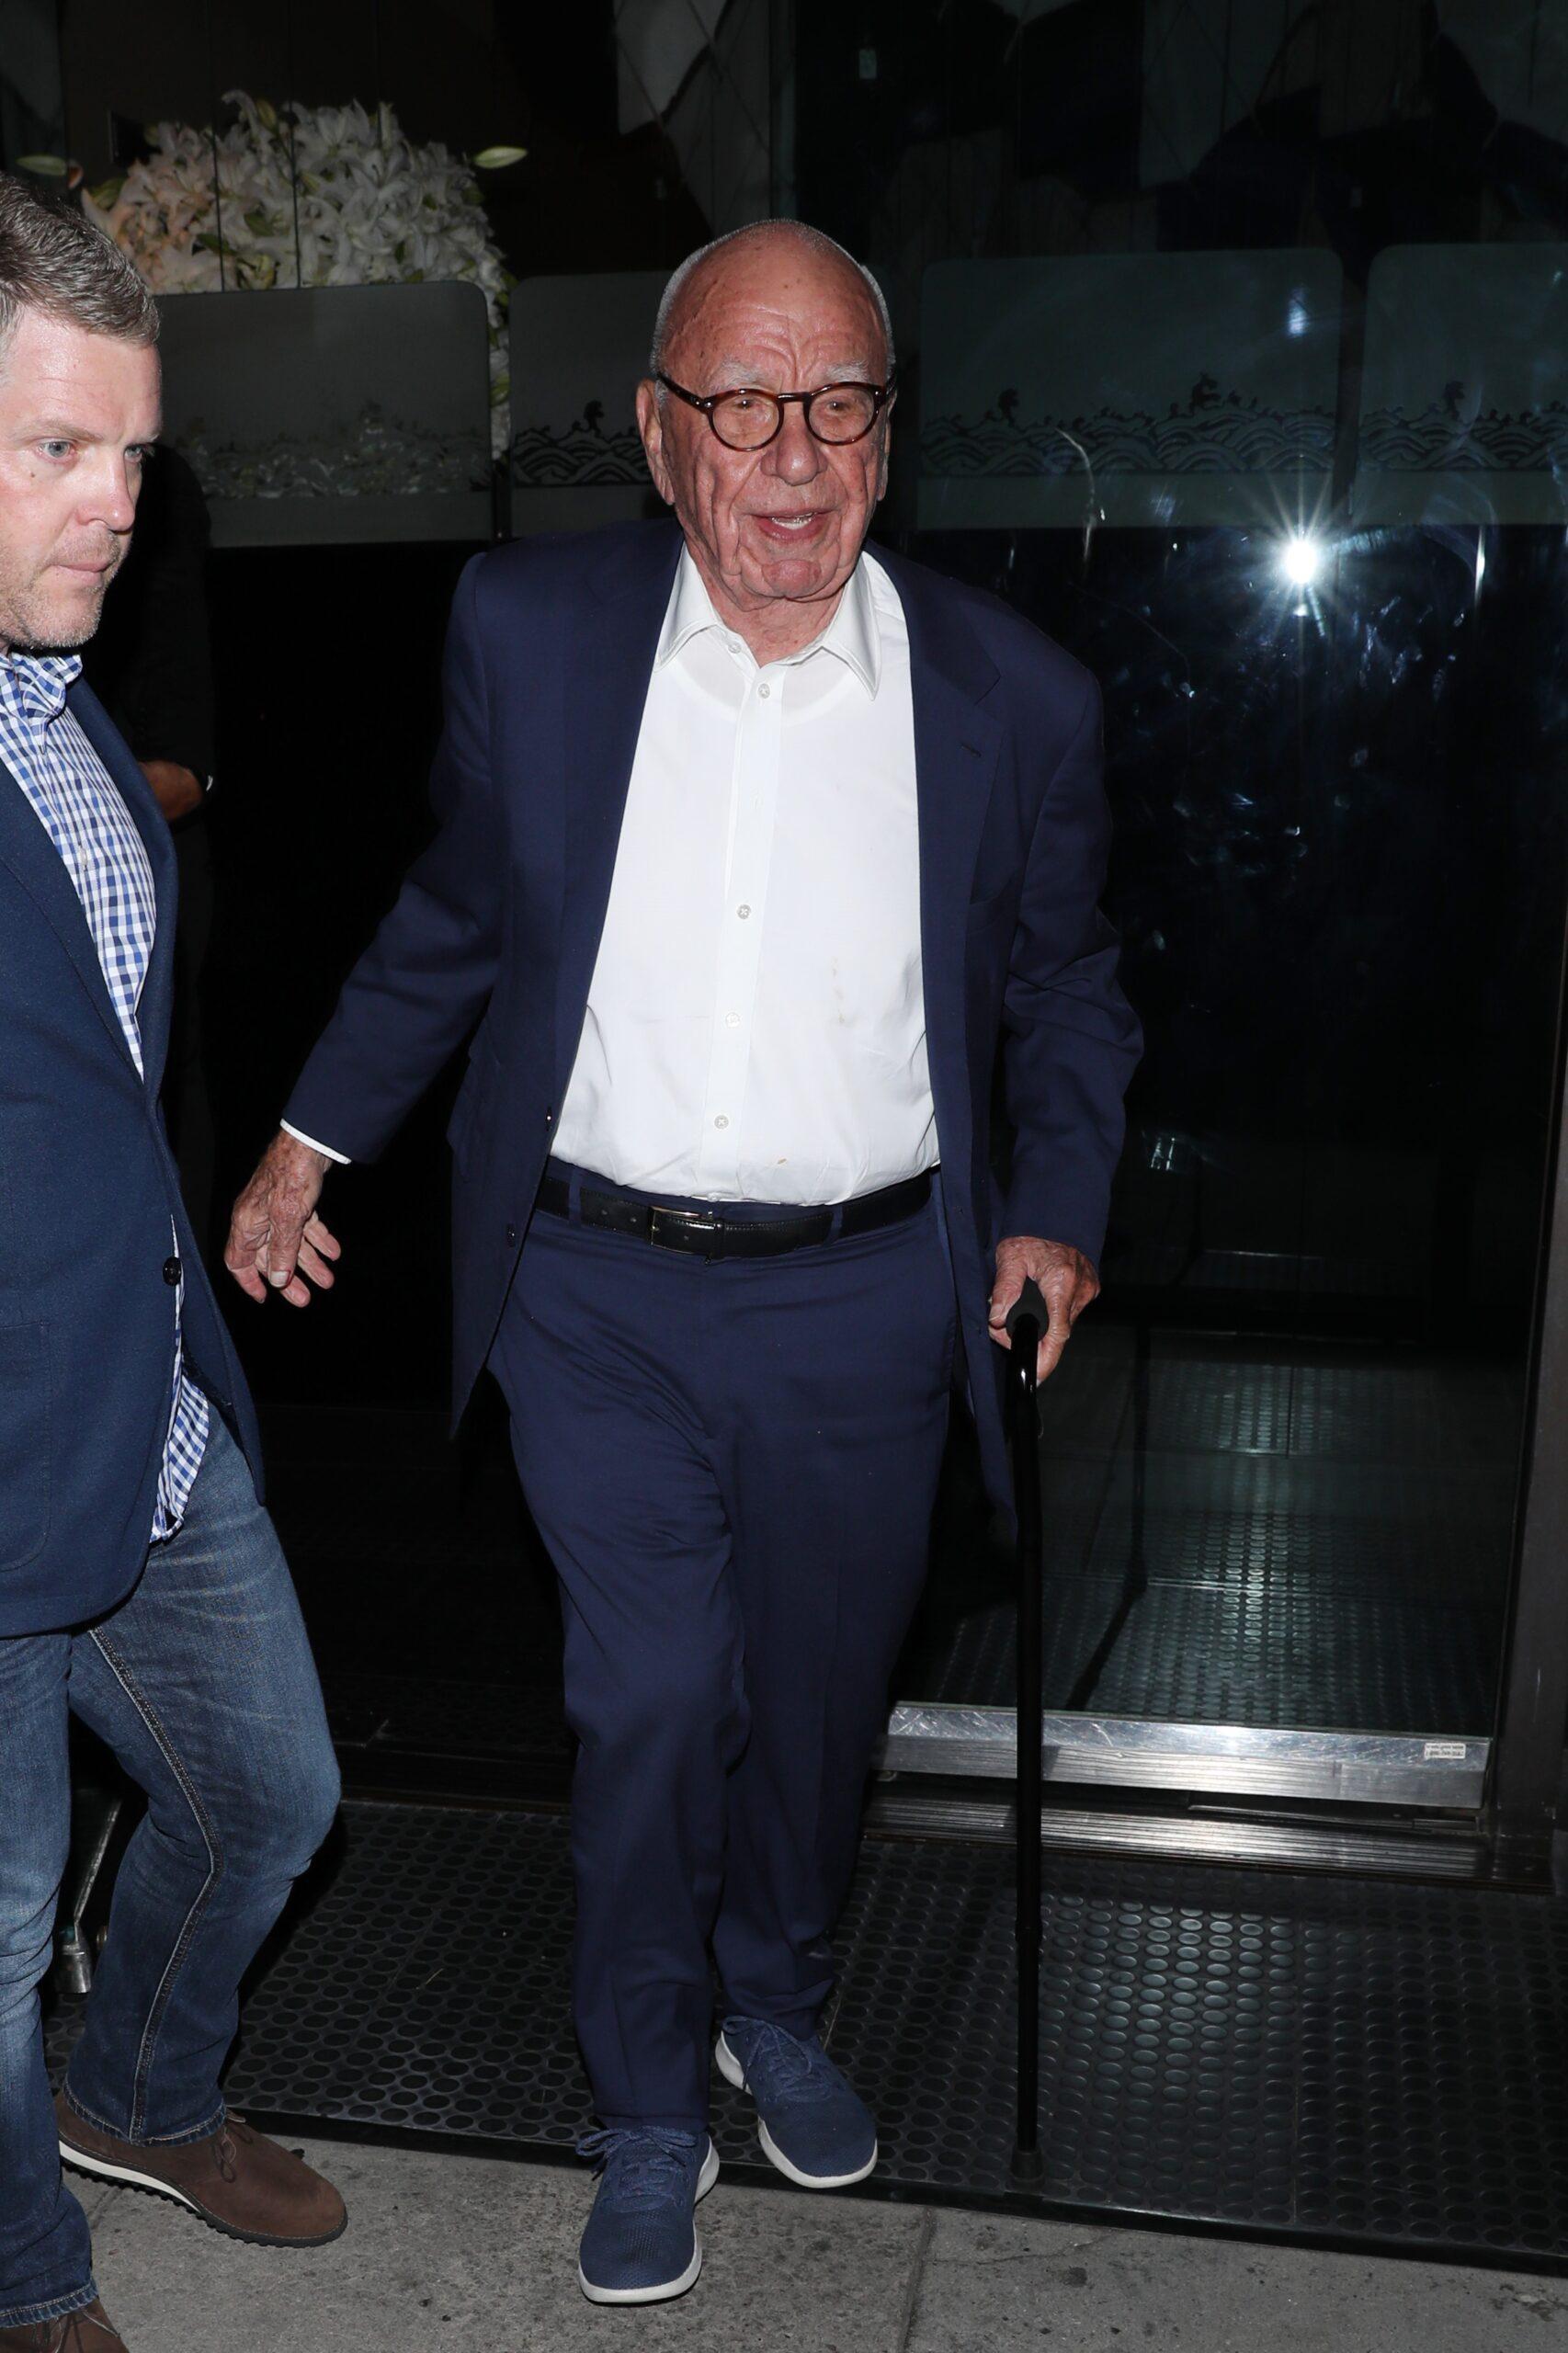 Rupert Murdoch walks with a cane in hand as he leaves Mr Chow restaurant after having dinner